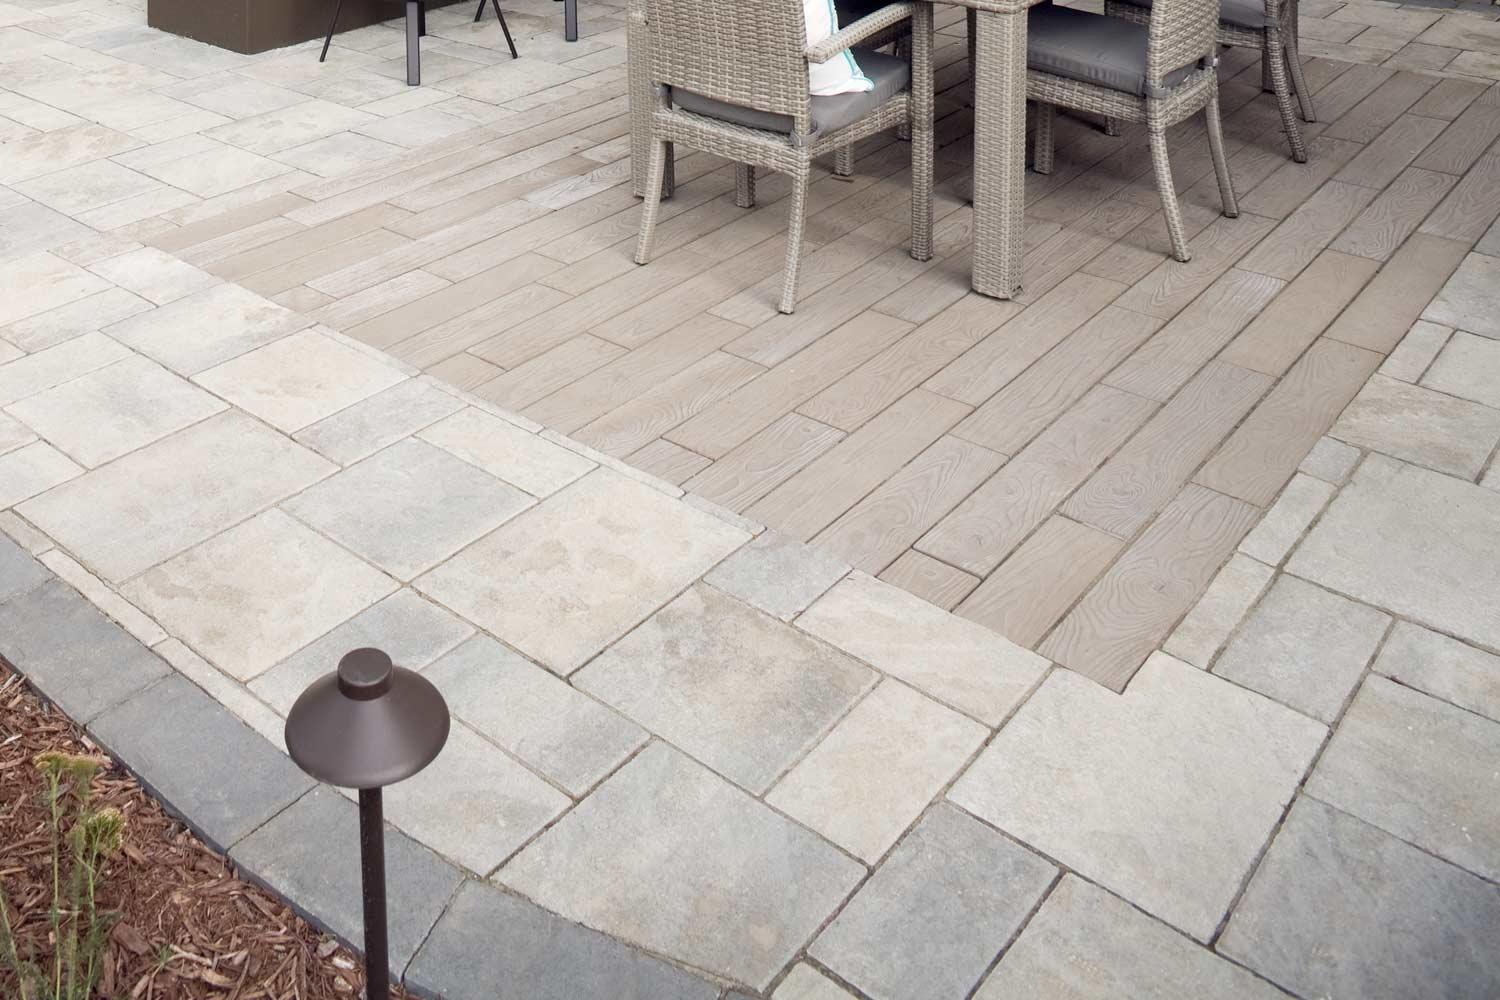 Paver patio designed with inlaid contrasting wood-look pavers.